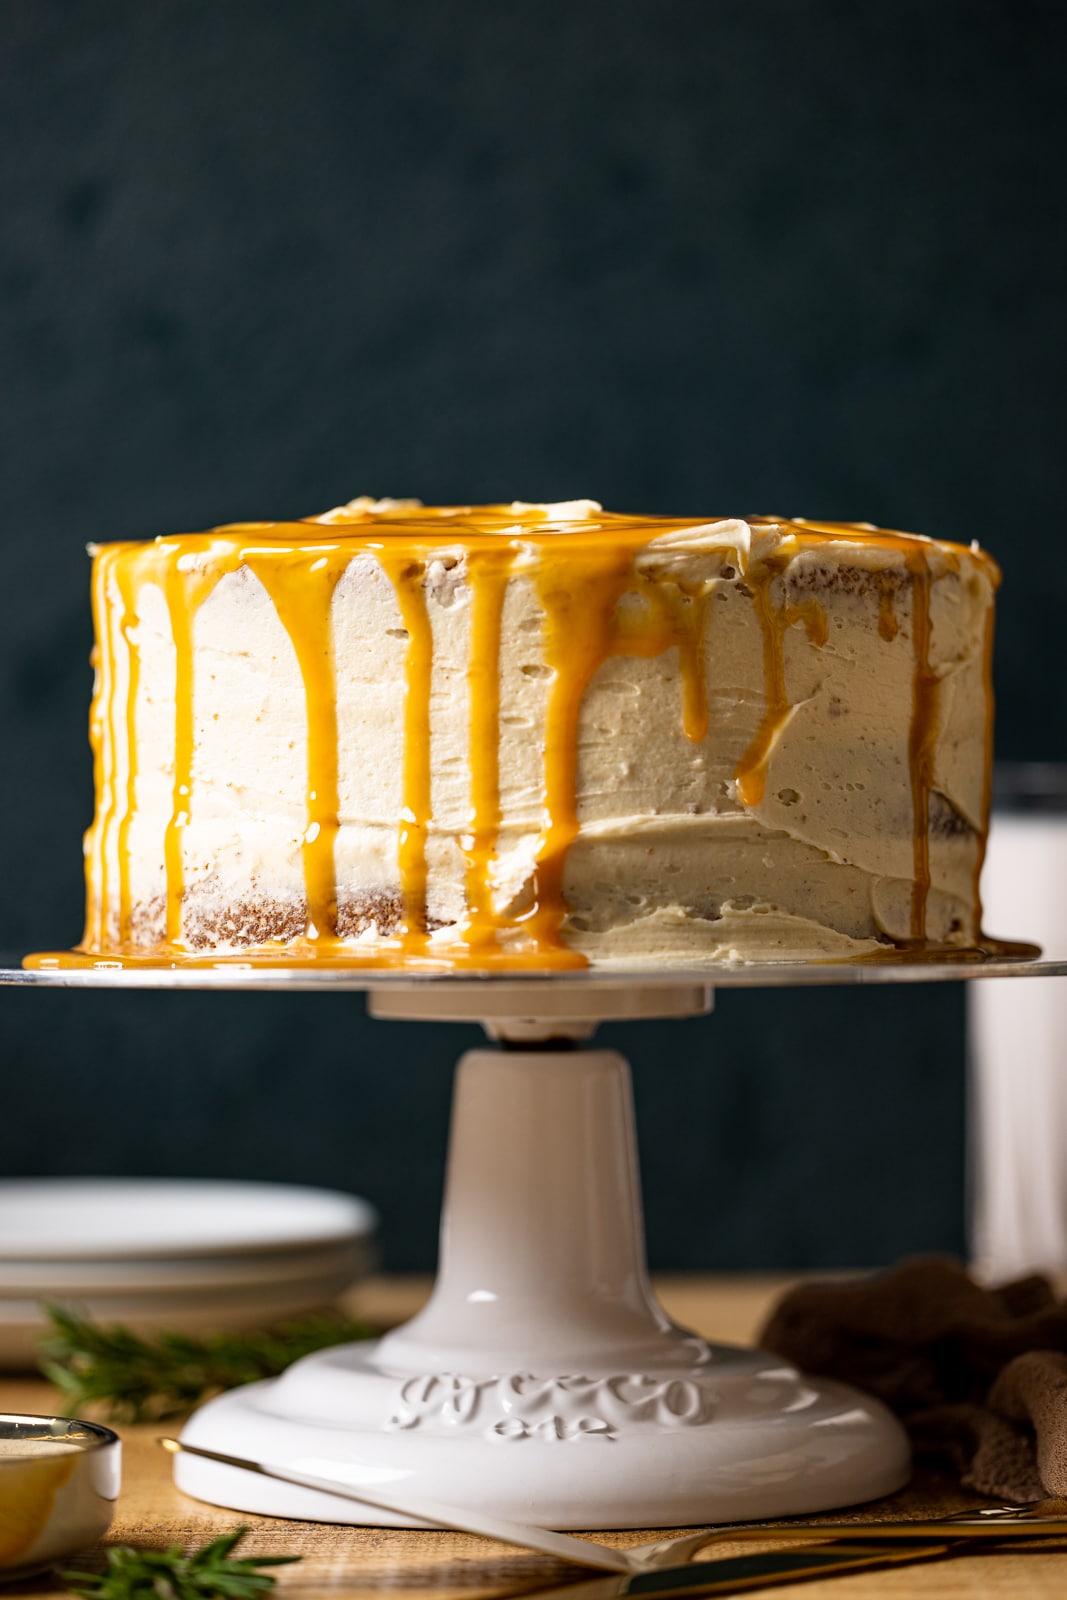 Cake on a cake stand with drips of salted caramel on the tops and sides on a brown wood table with a dark green background.